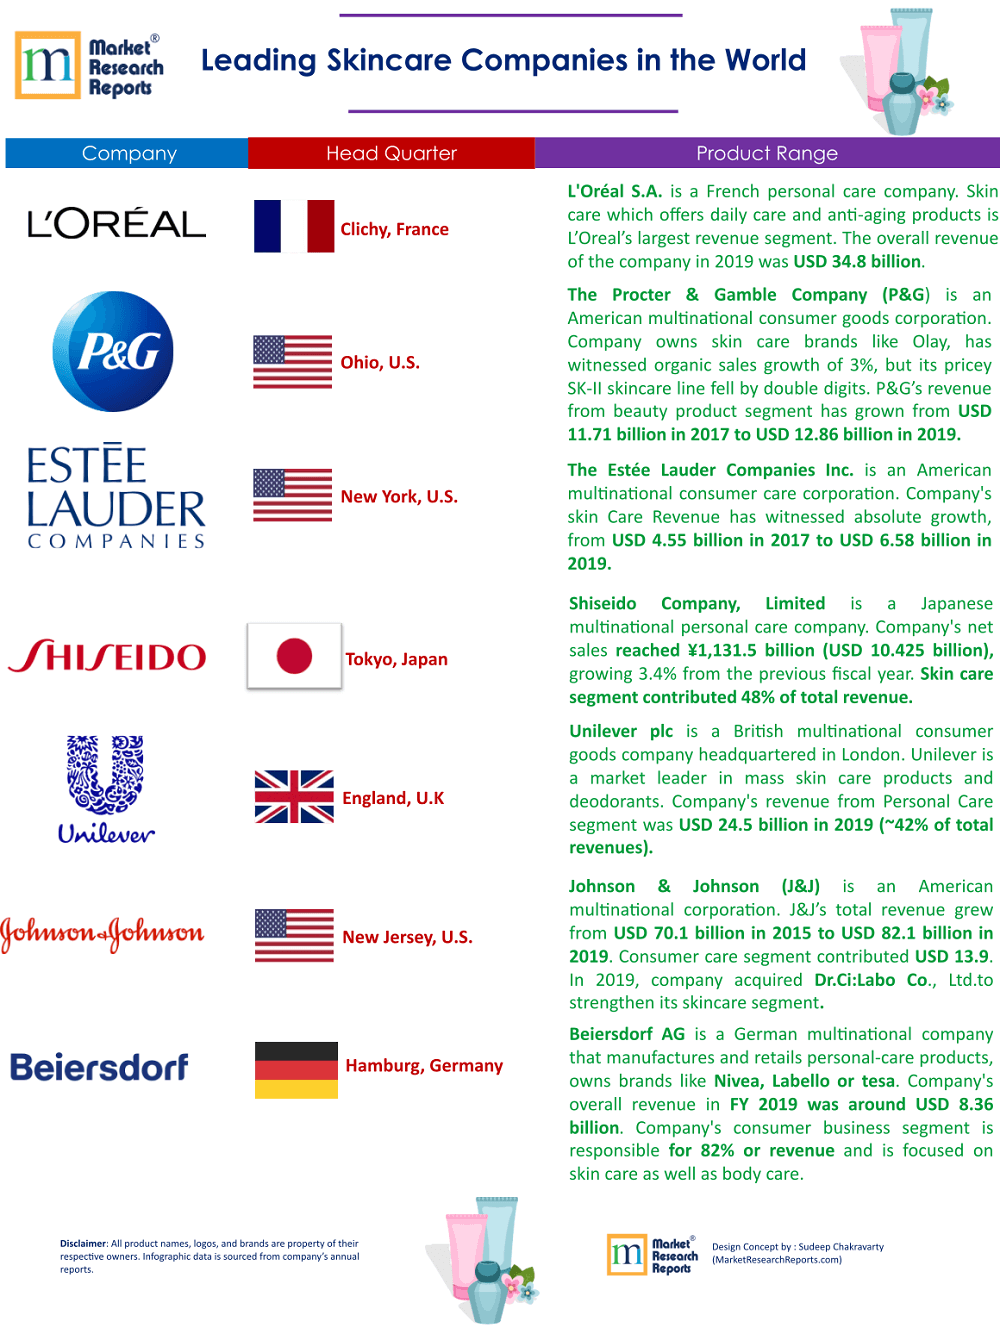 Leading Skincare Companies in the World